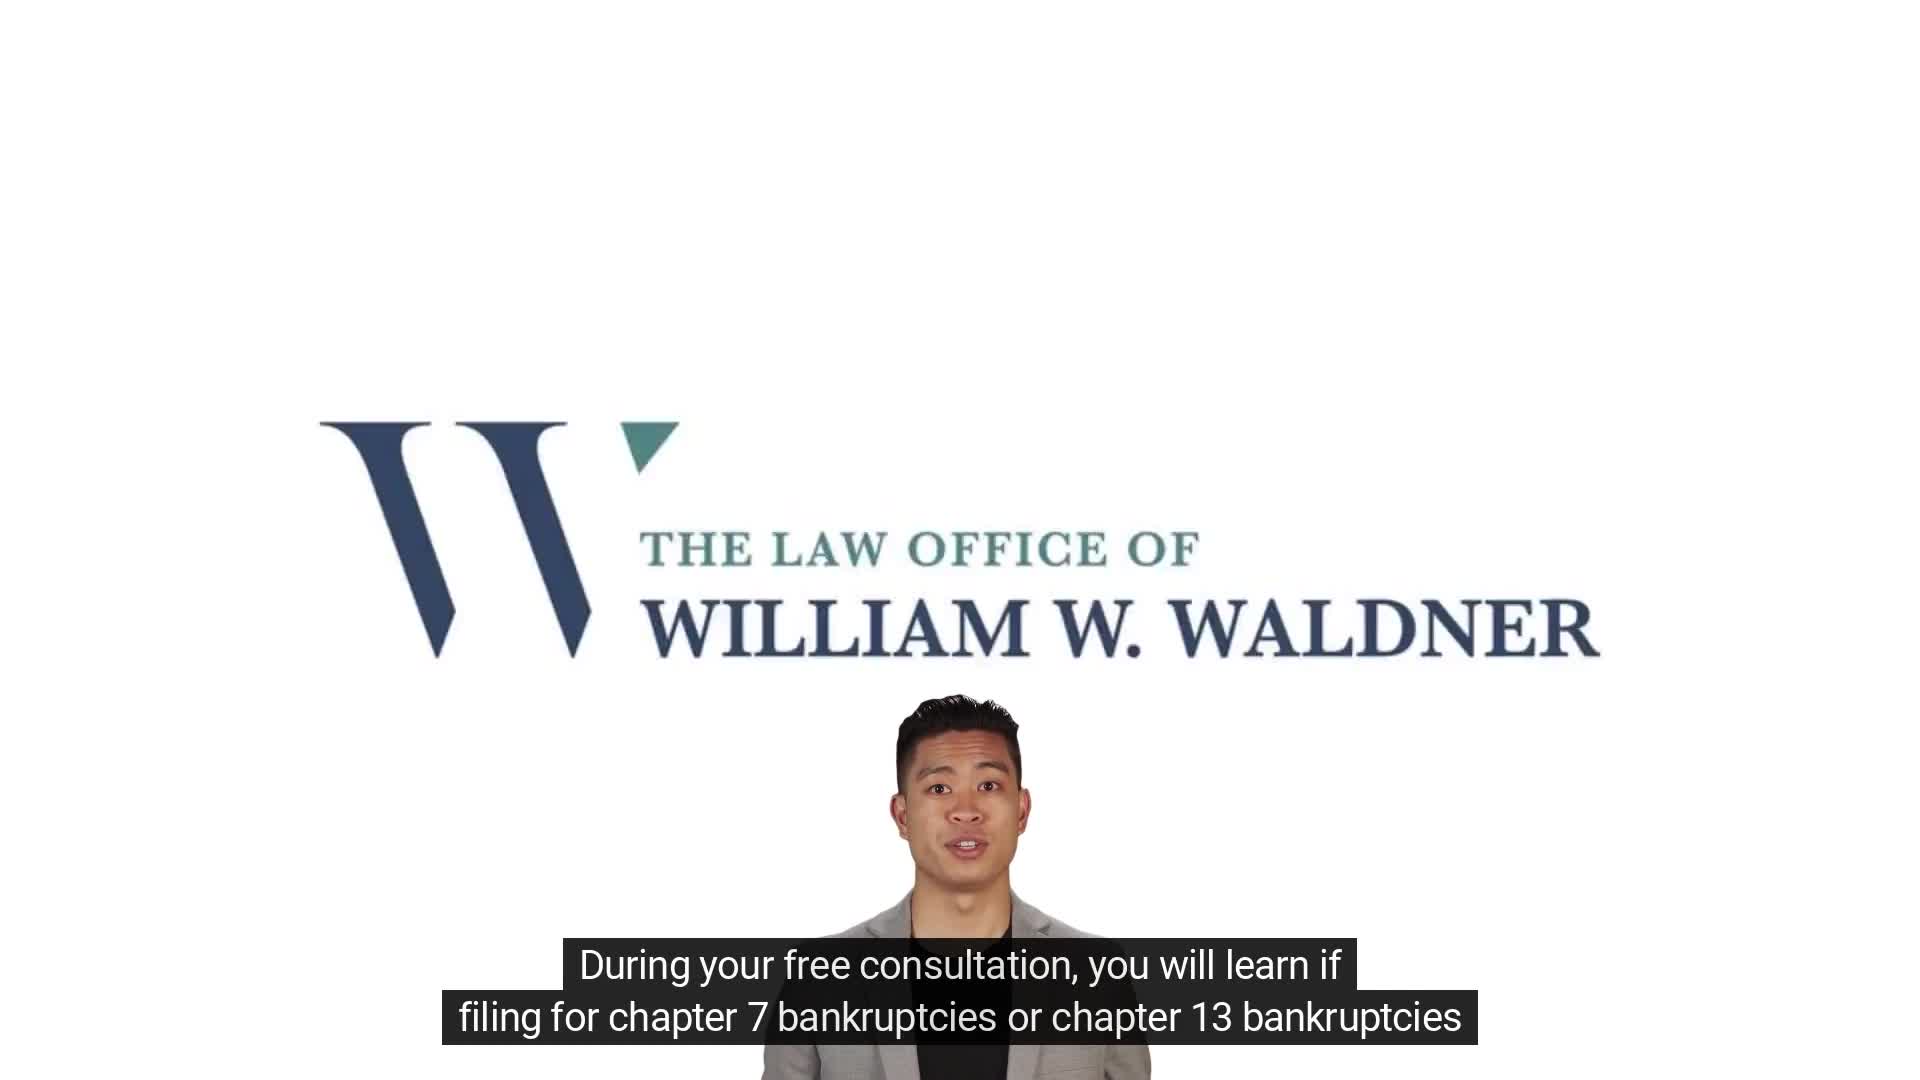 Law Office of William Waldner - Bankruptcy Lawyer in Yonkers